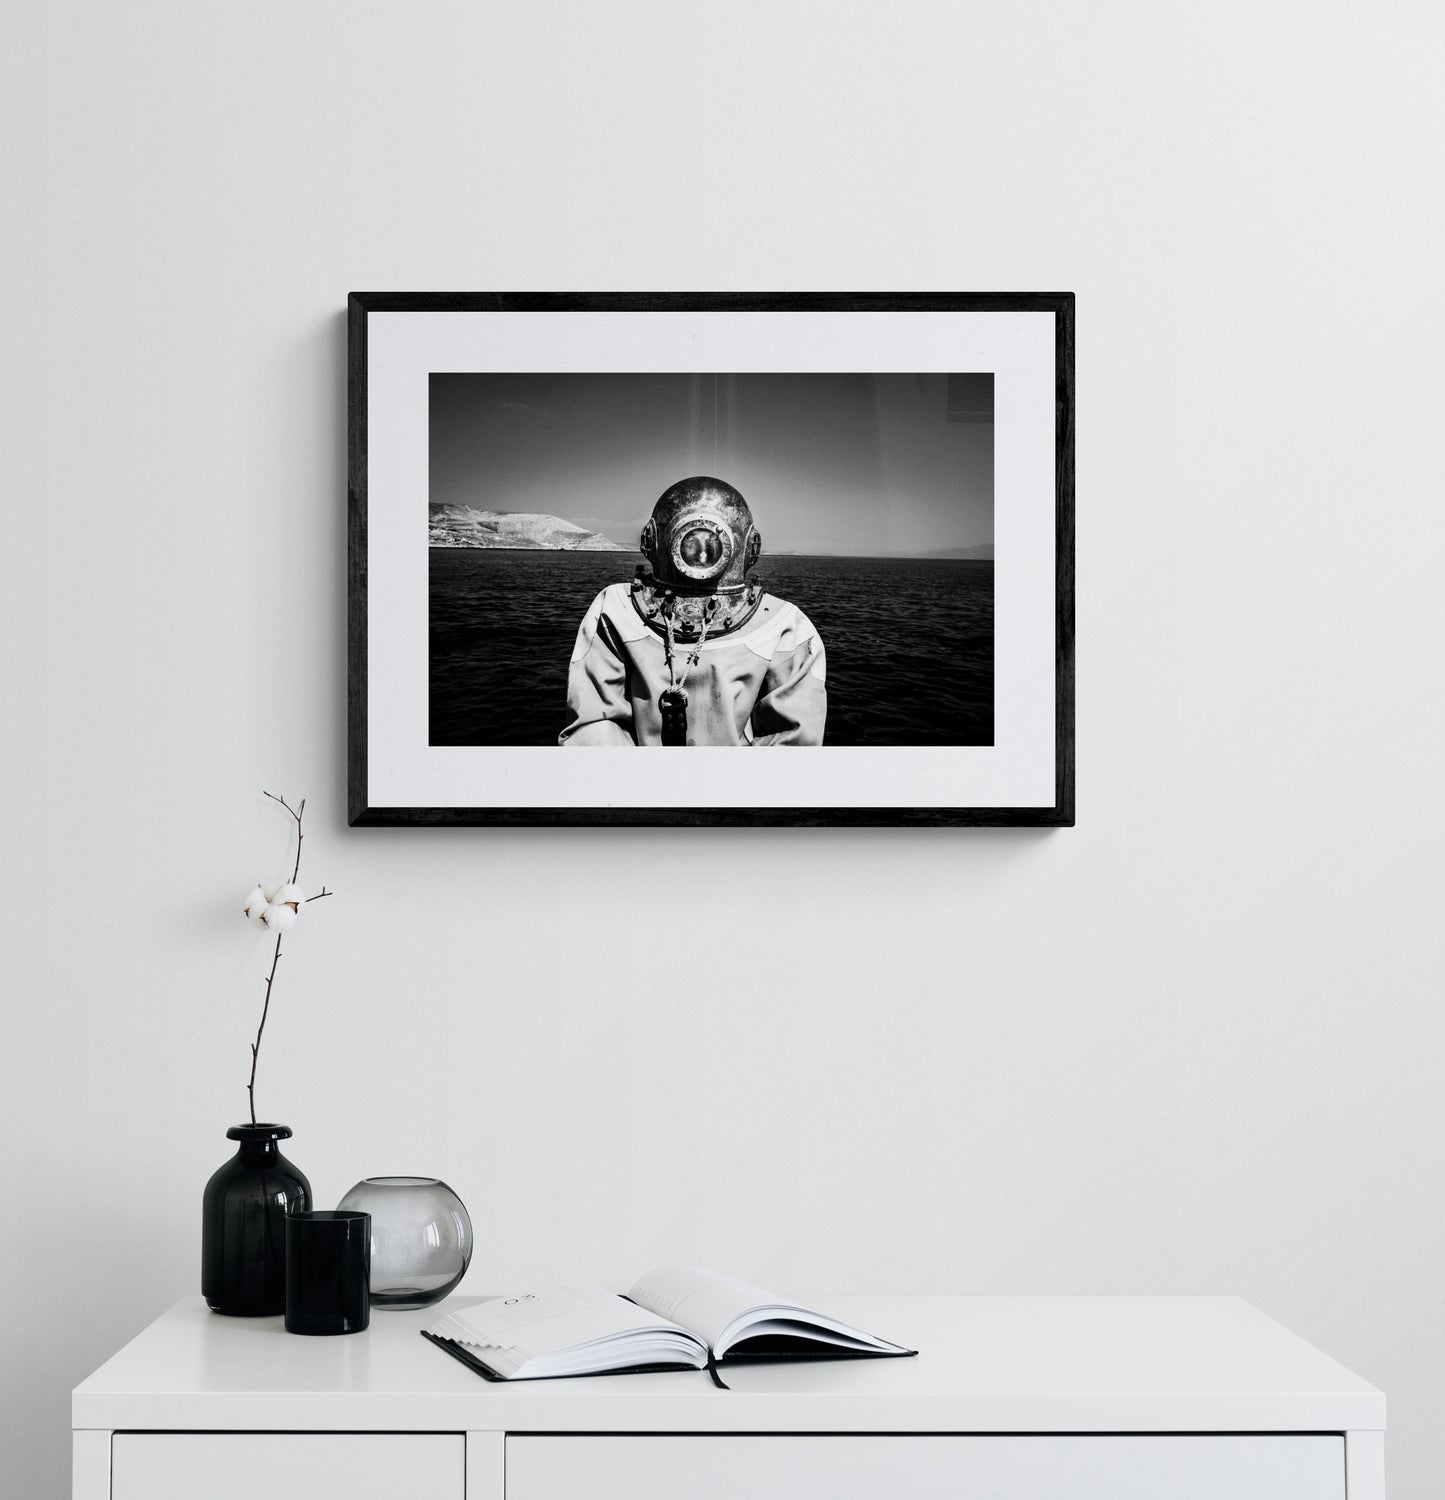 Black and White Photography Wall Art Greece | Diver in Kalymnos Dodecanese - single framed